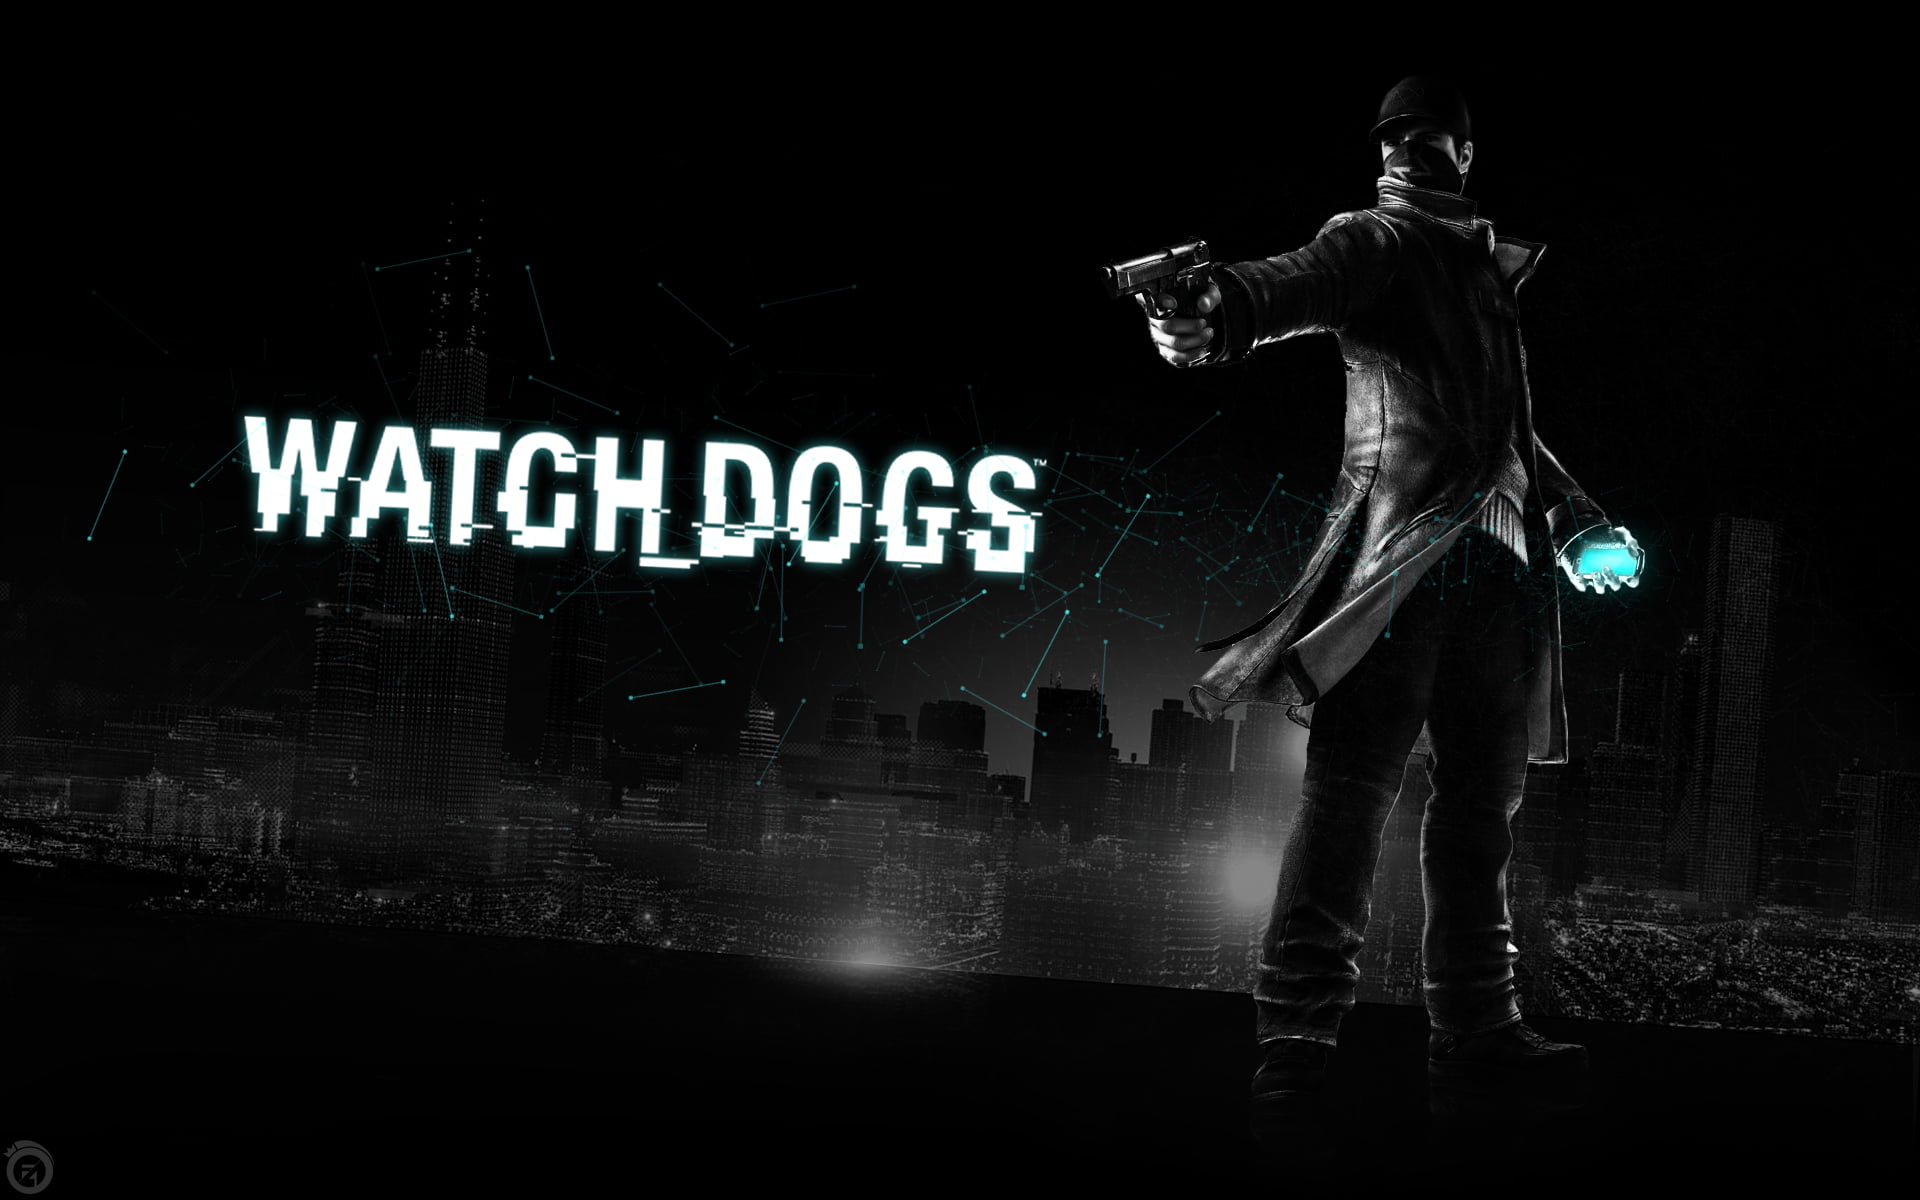 Watch Dogs illustration, Watch_Dogs, artwork, video games